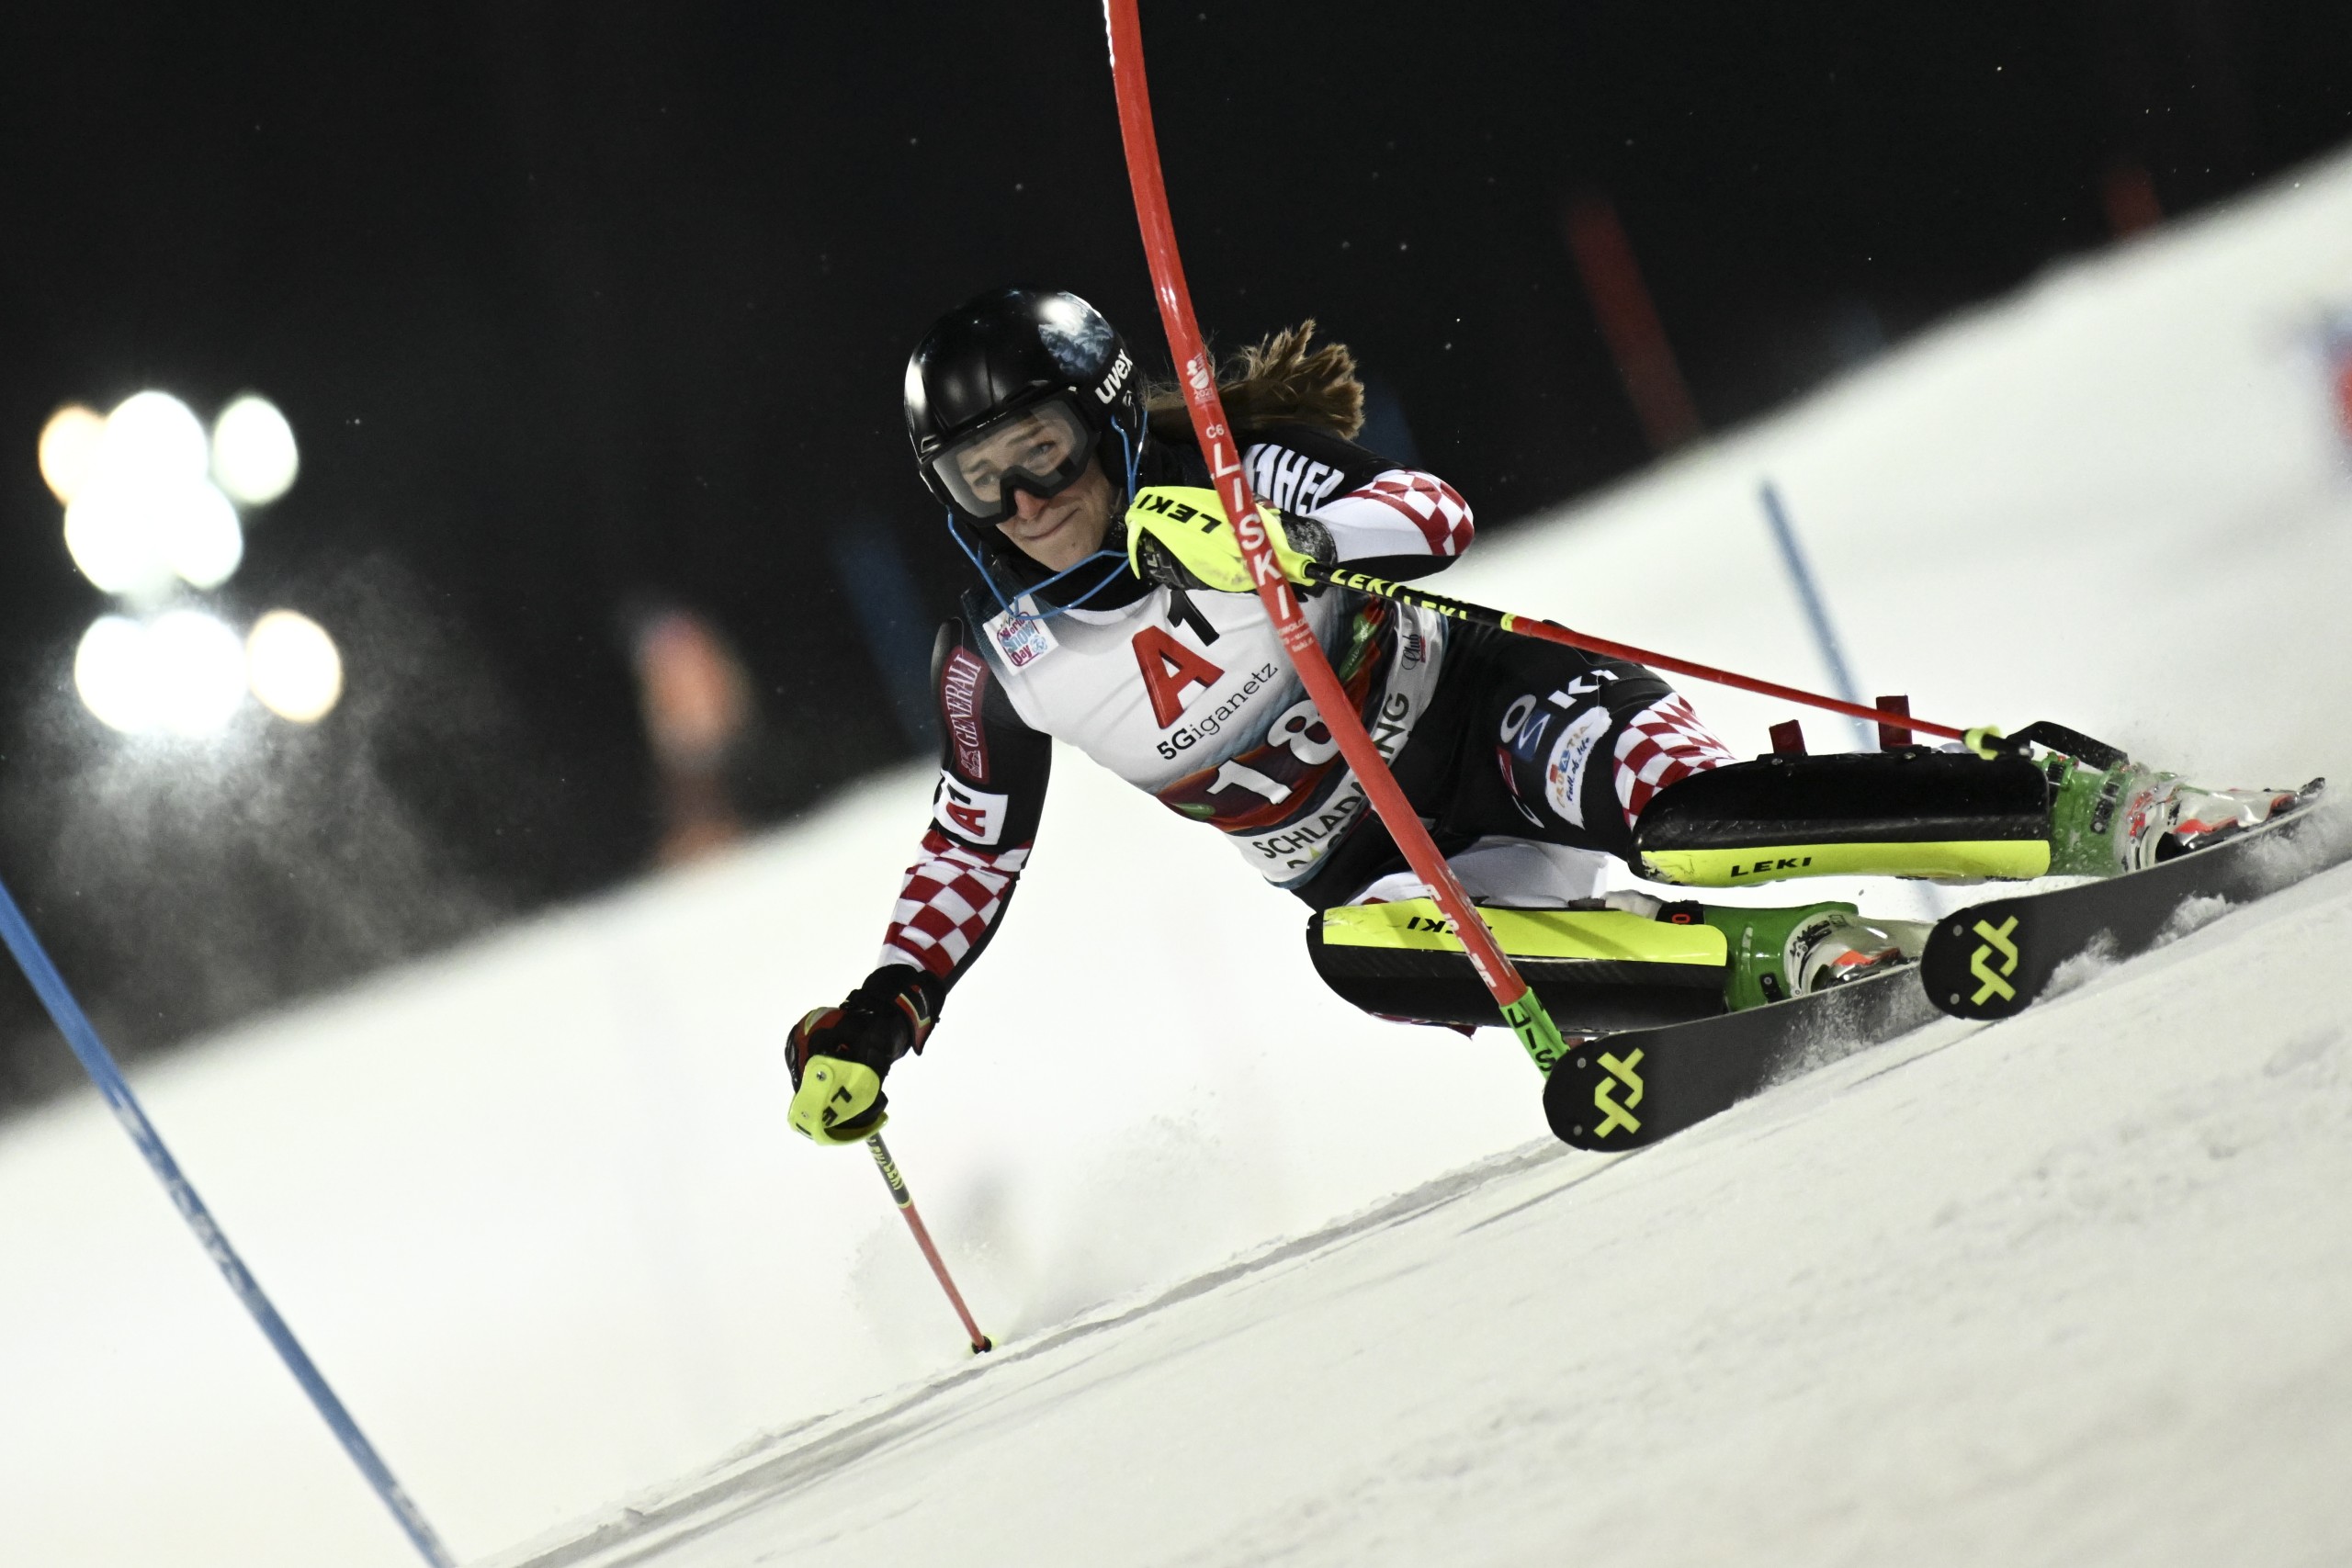 epa09679146 Leona Popovic of Croatia in action during the first run of the women's Slalom race of the FIS Alpine Skiing World Cup event in Schladming, Austria, 11 January 2022.  EPA/CHRISTIAN BRUNA